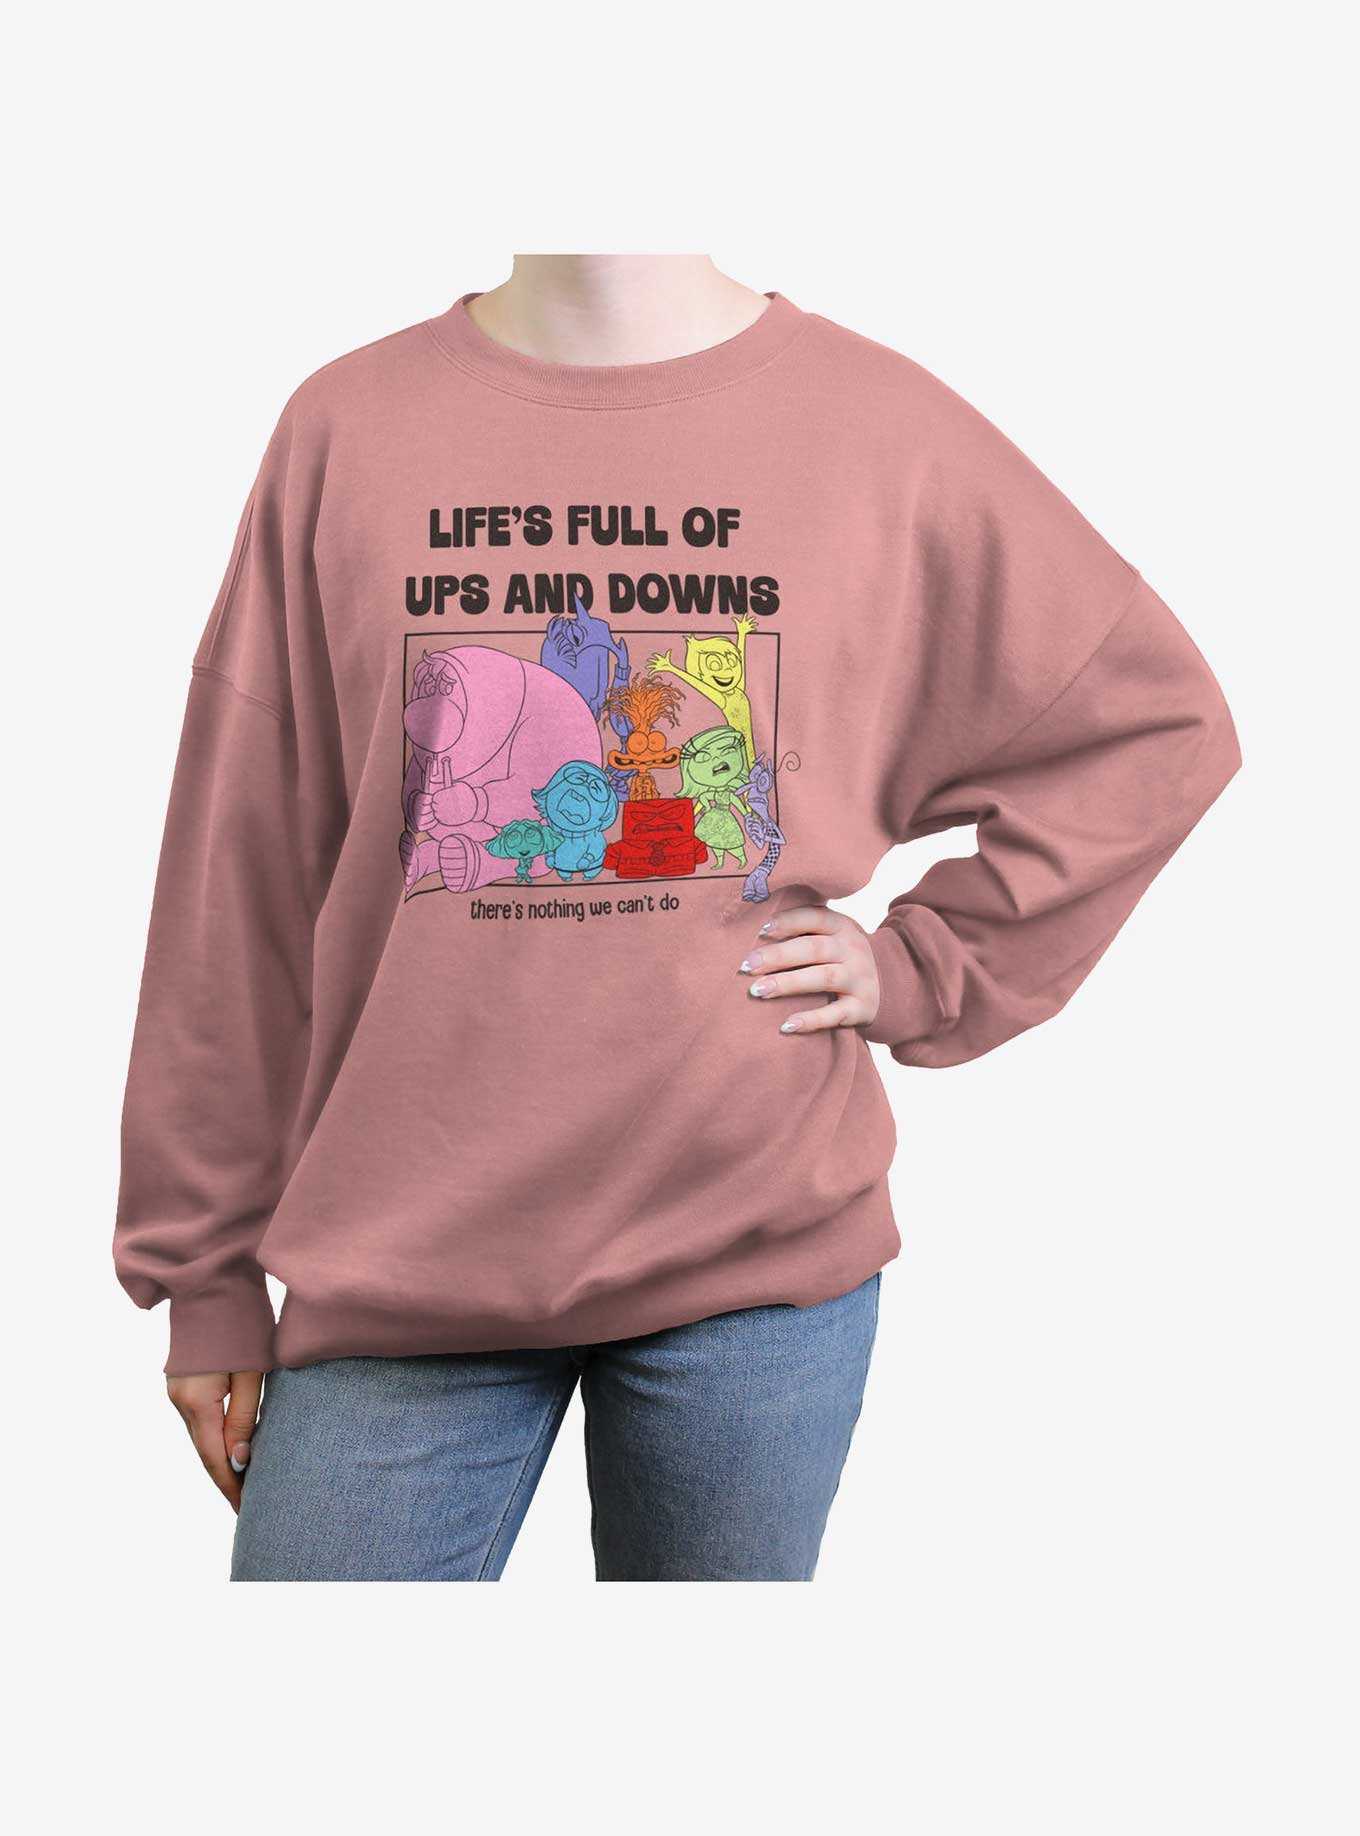 Disney Pixar Inside Out 2 Life's Full Of Ups And Downs Girls Oversized Sweatshirt, , hi-res